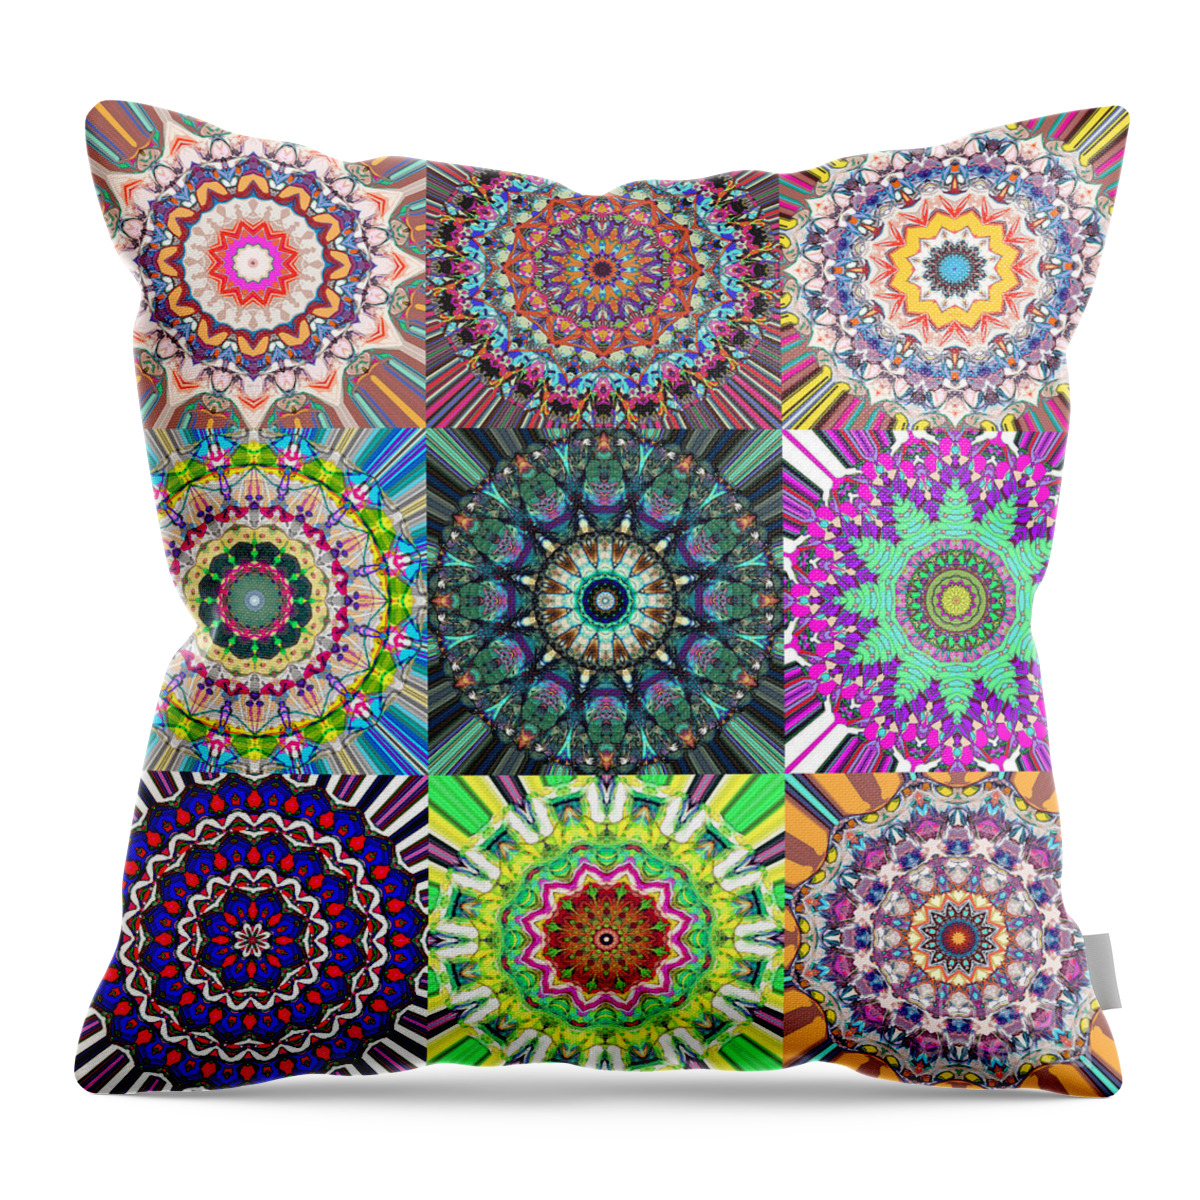 Mandala Throw Pillow featuring the digital art Abstract Mandala Collage by Phil Perkins